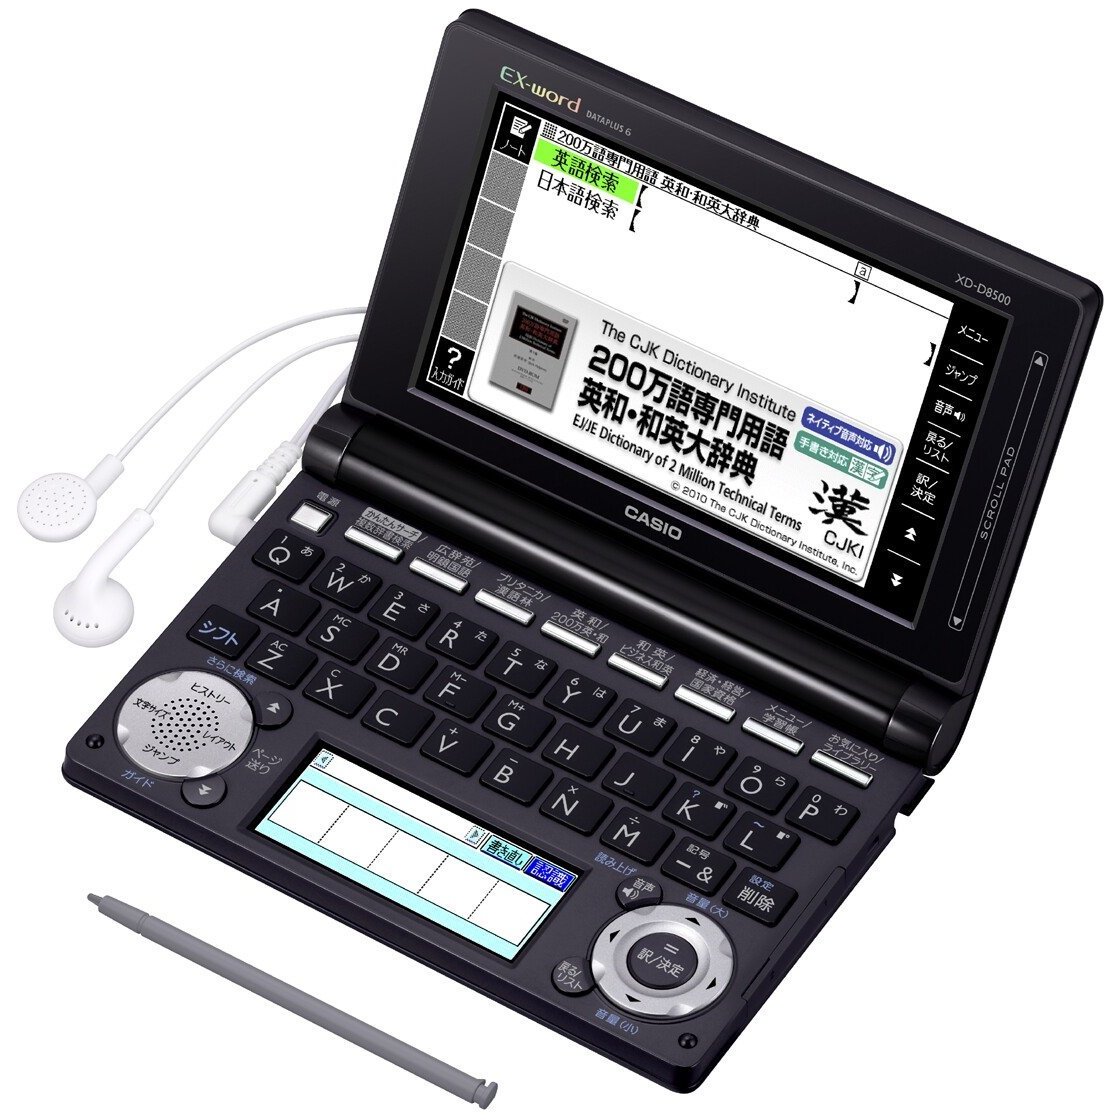 CASIO EX-word XD-D8500BK Japanese English Electronic Dictionary